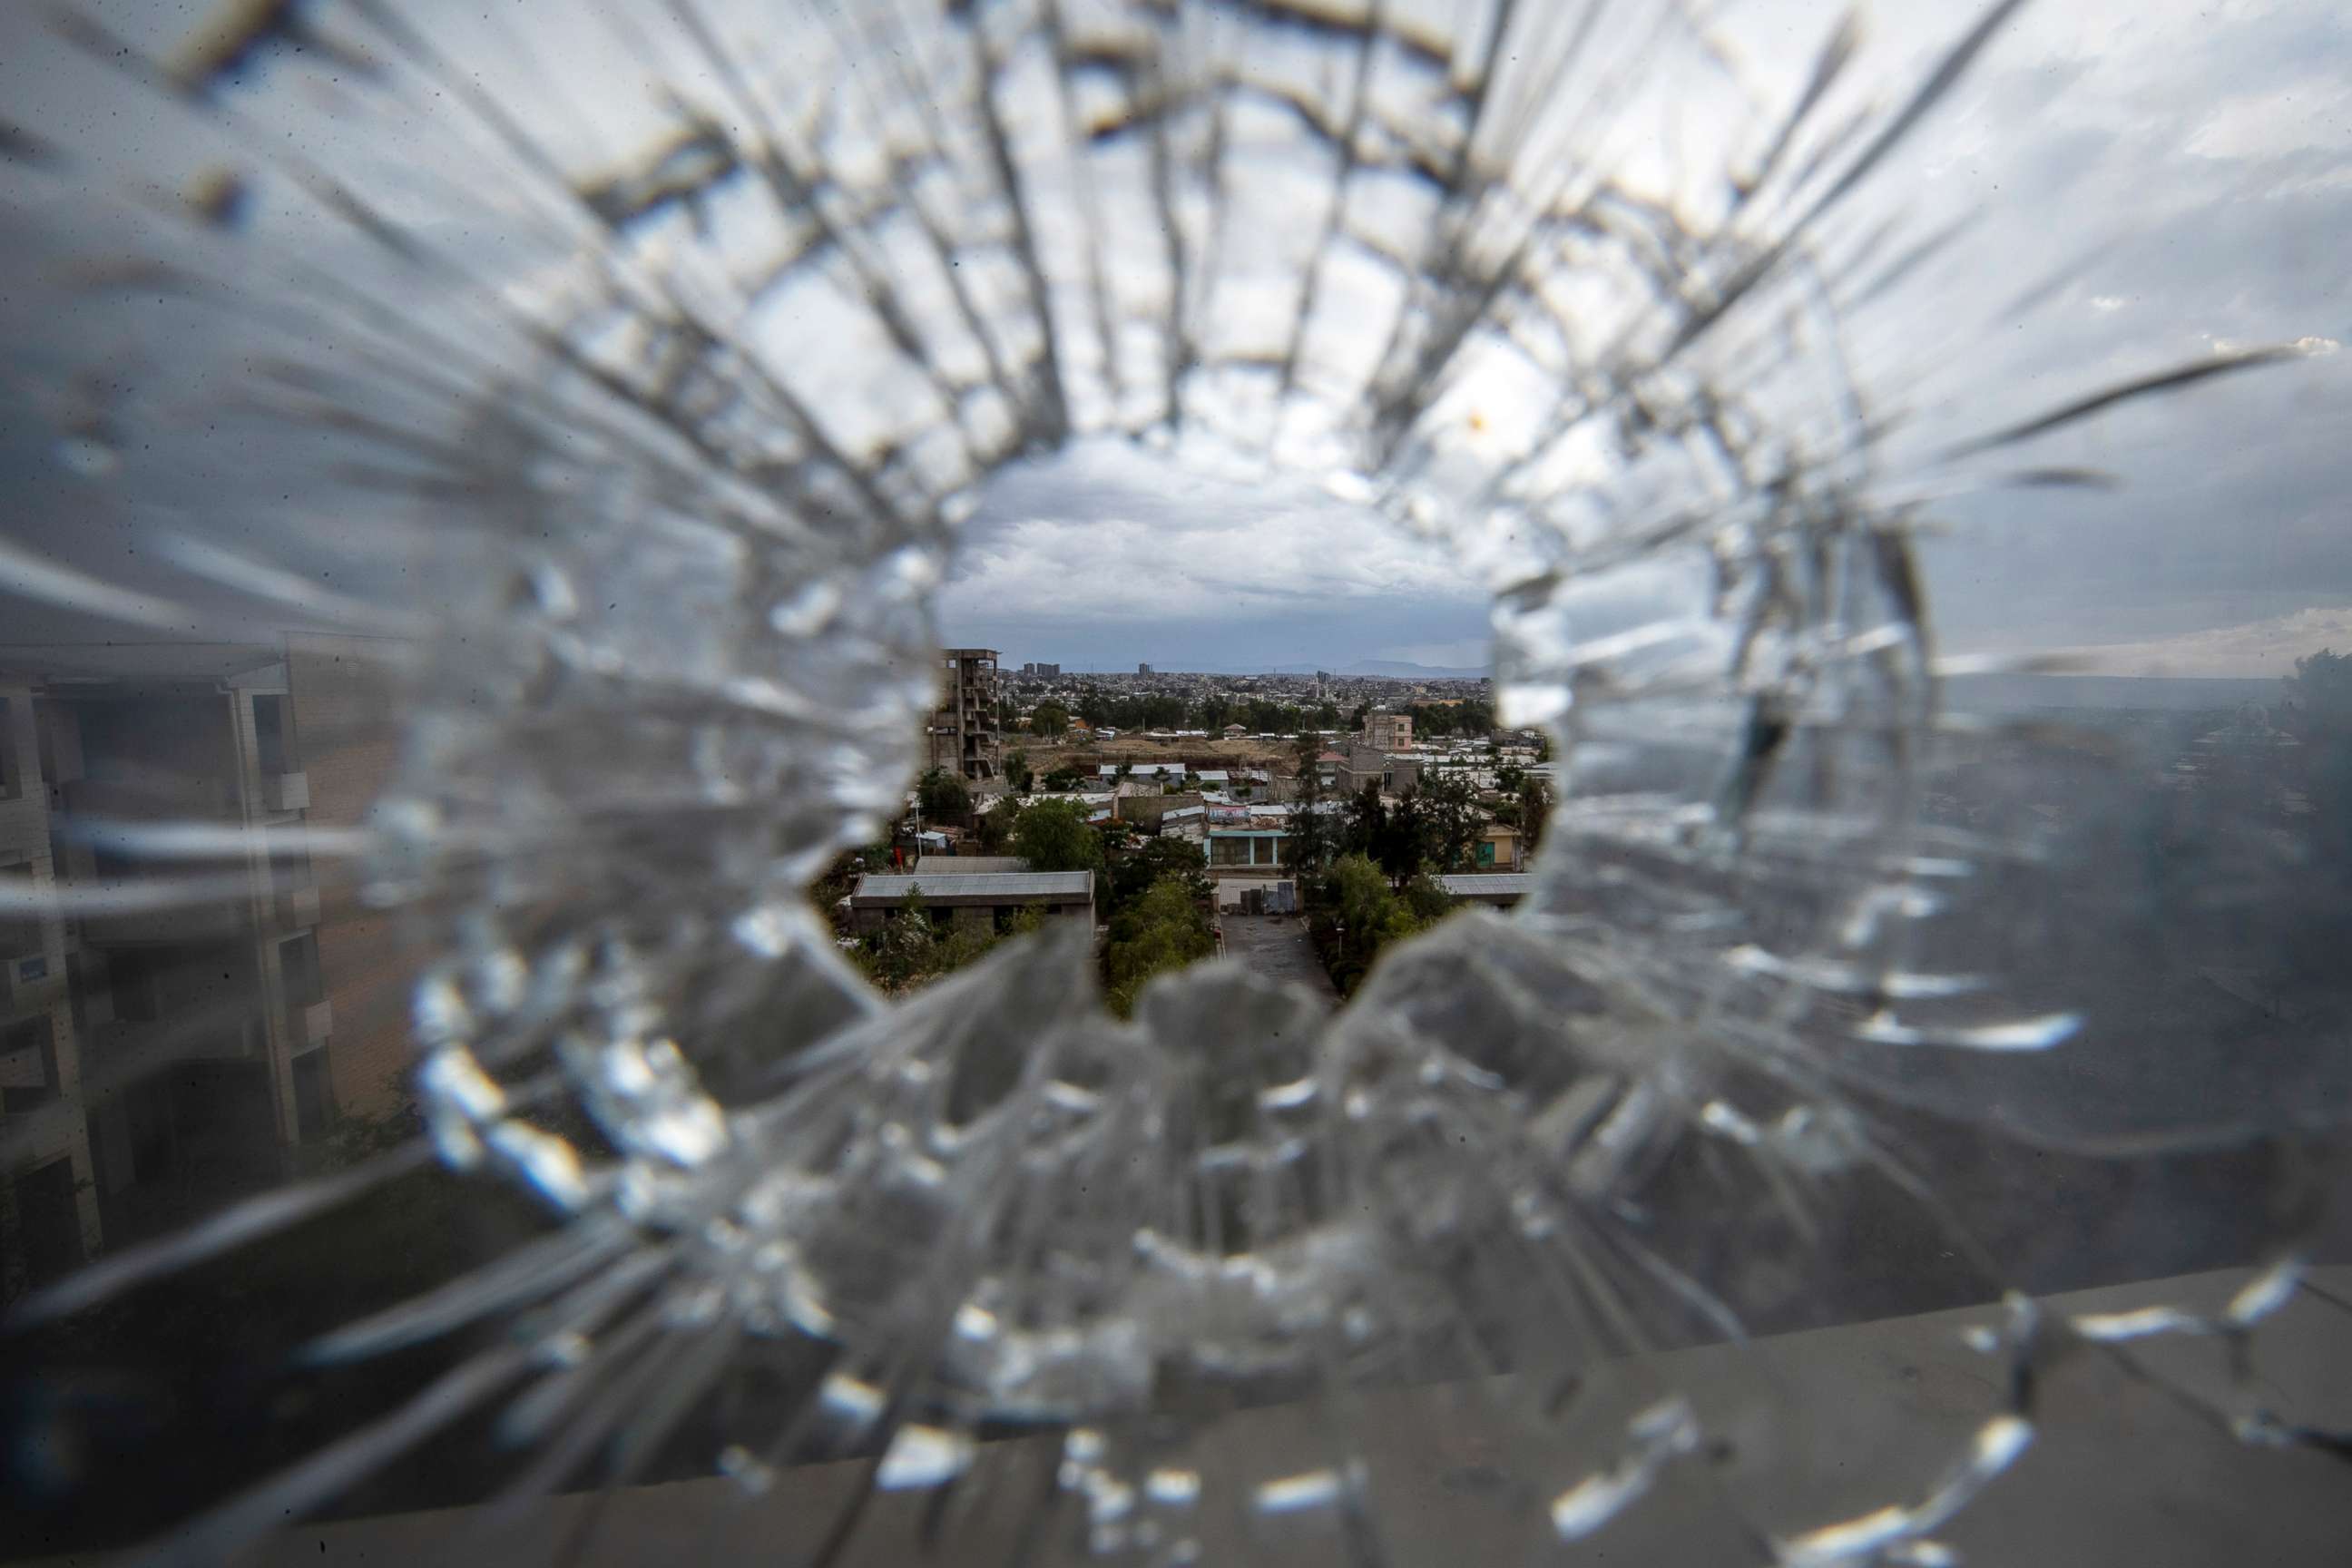 PHOTO: The city of Mekele is seen through a bullet hole in a stairway window of the Ayder Referral Hospital in the Tigray region of northern Ethiopia on May 6, 2021.